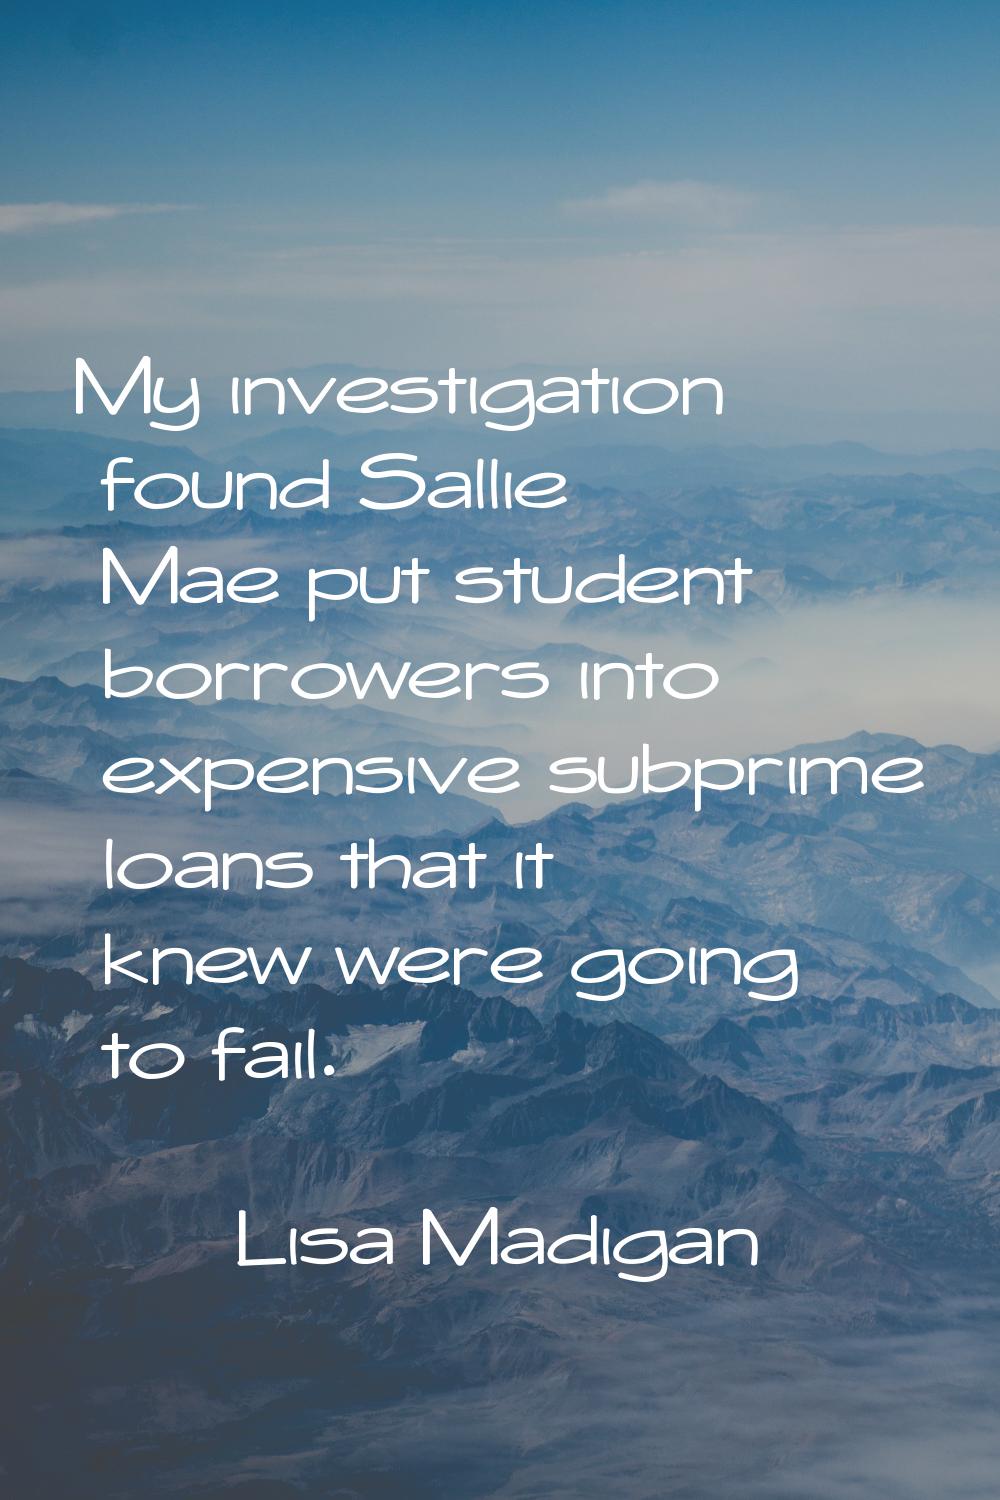 My investigation found Sallie Mae put student borrowers into expensive subprime loans that it knew 